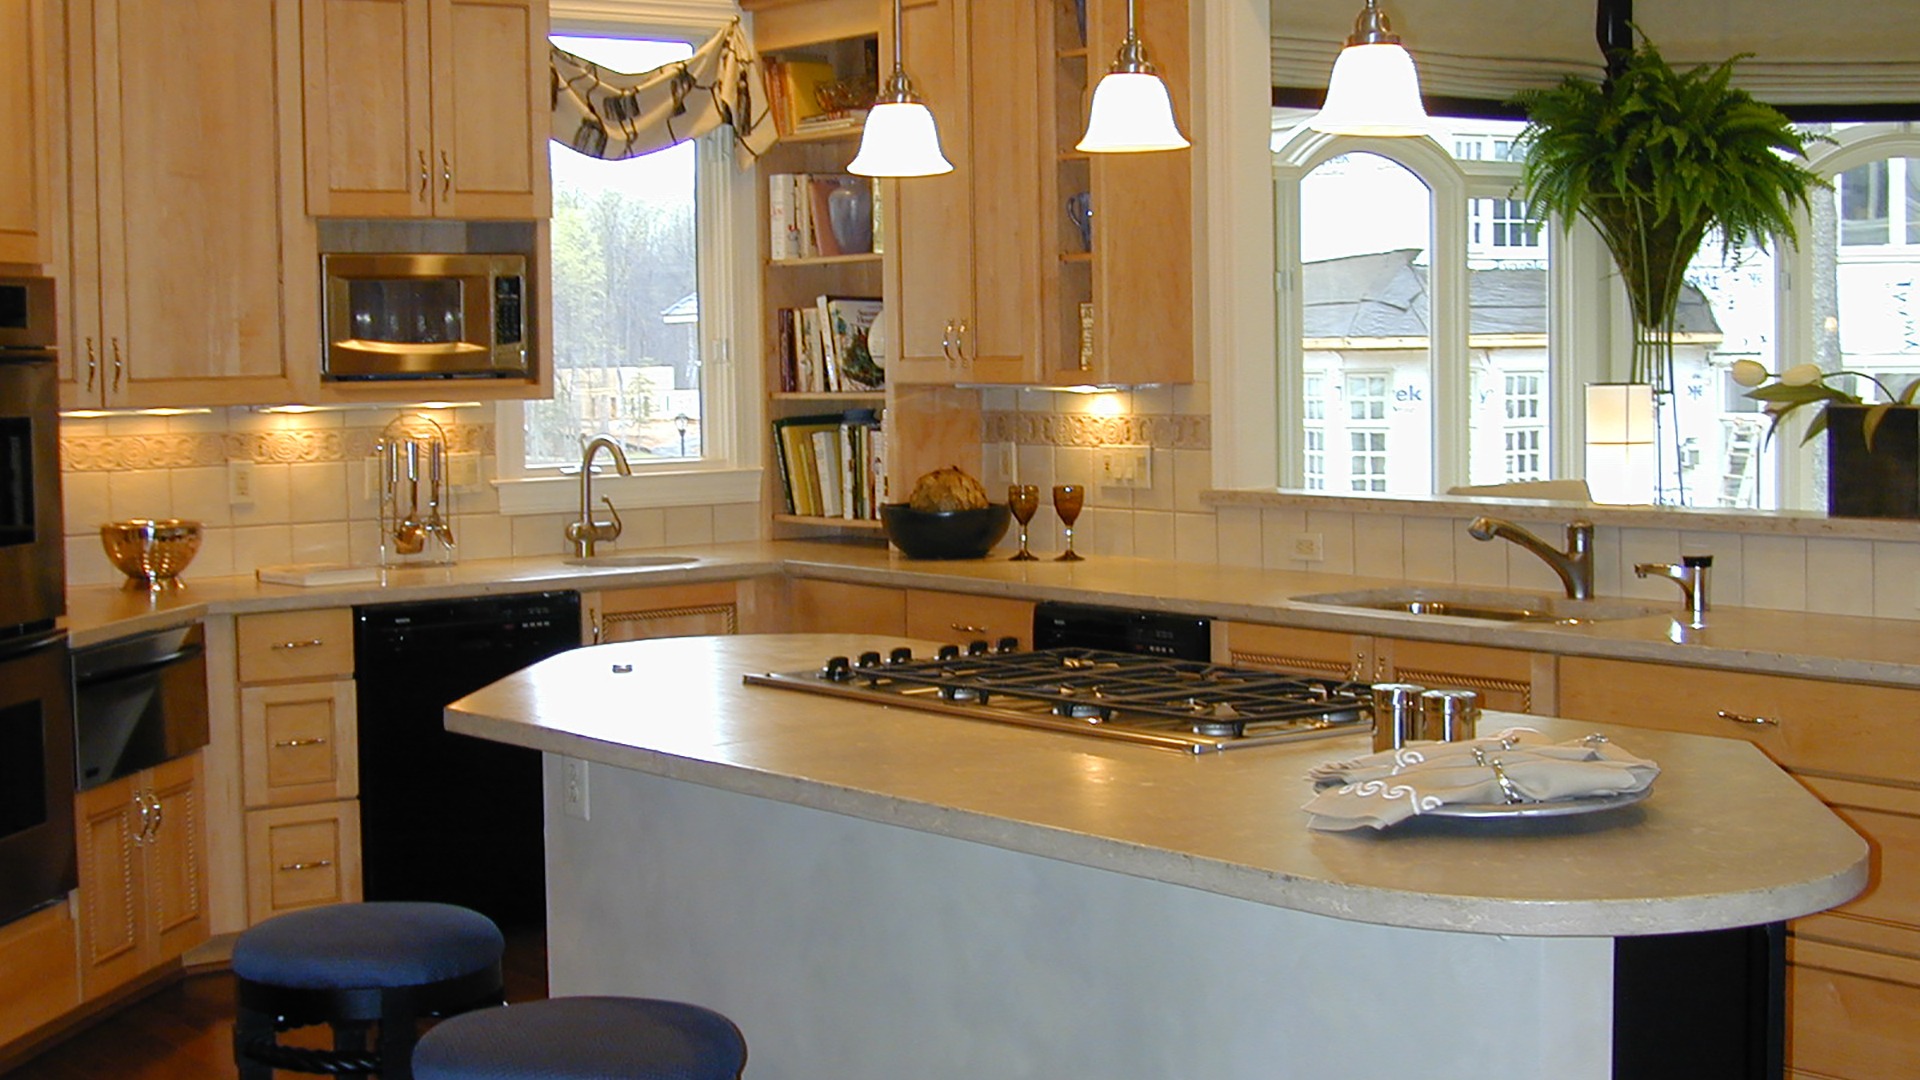 Woodley kitchen. Some optional features shown. Kitchen has design has since been updated.